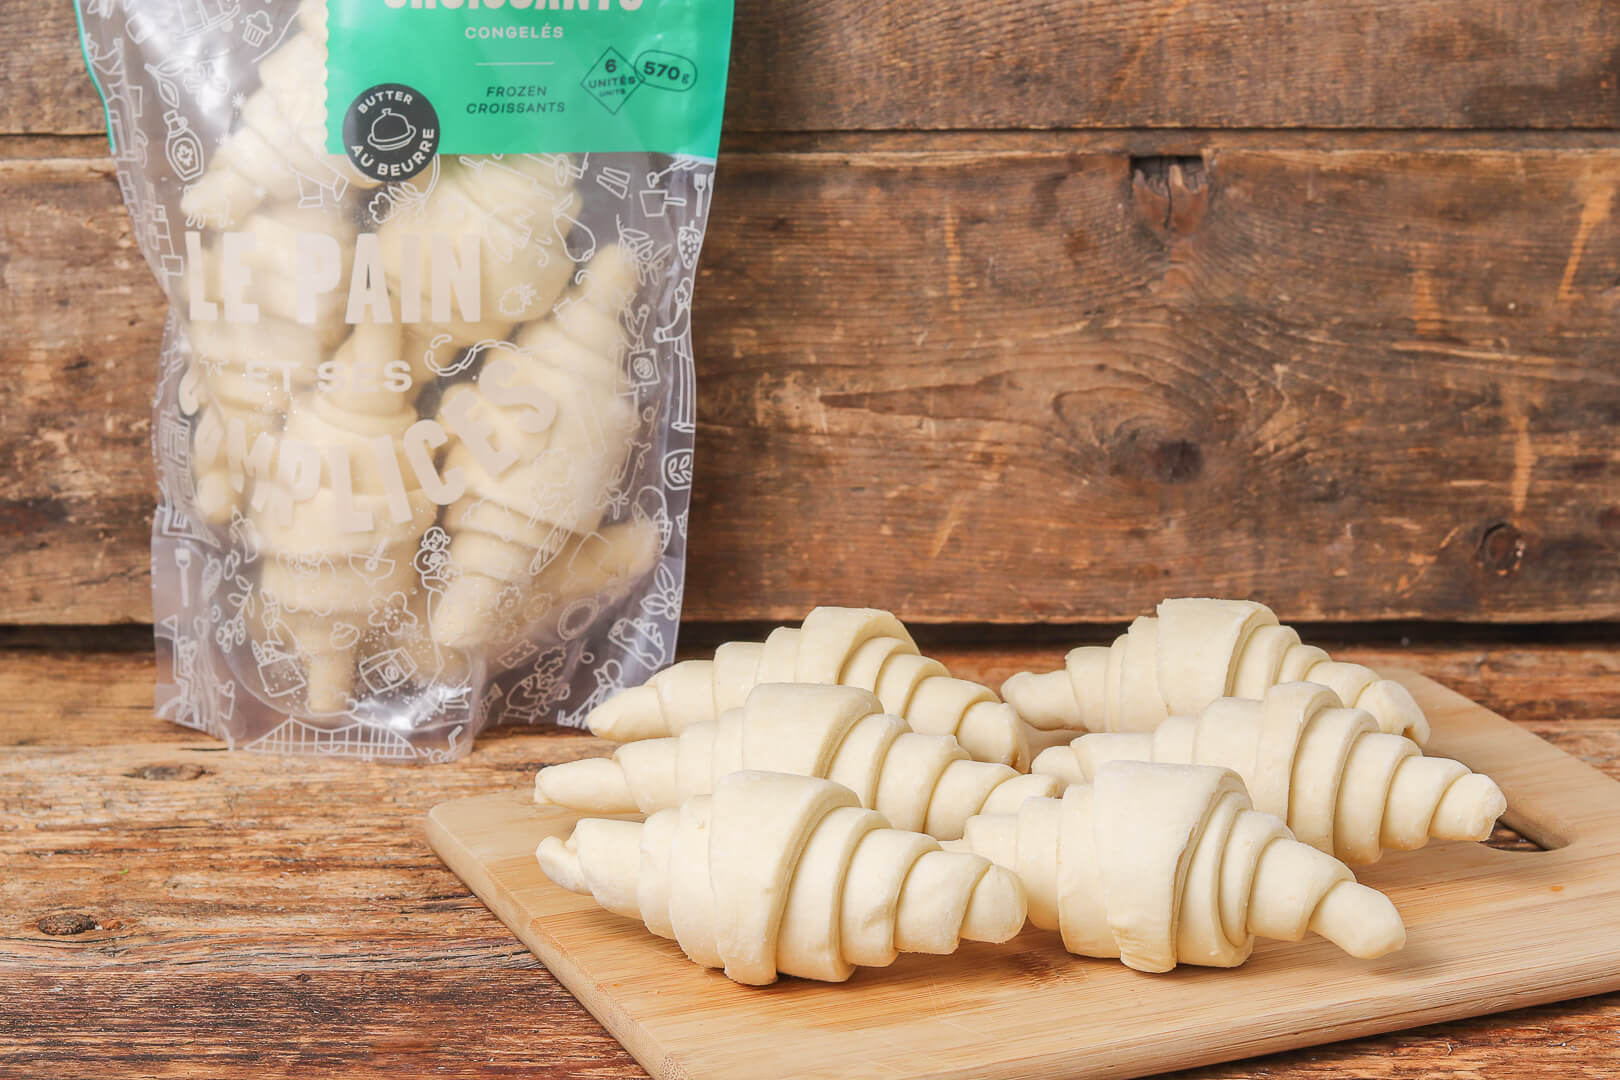 how-to-proof-frozen-croissants-quickly